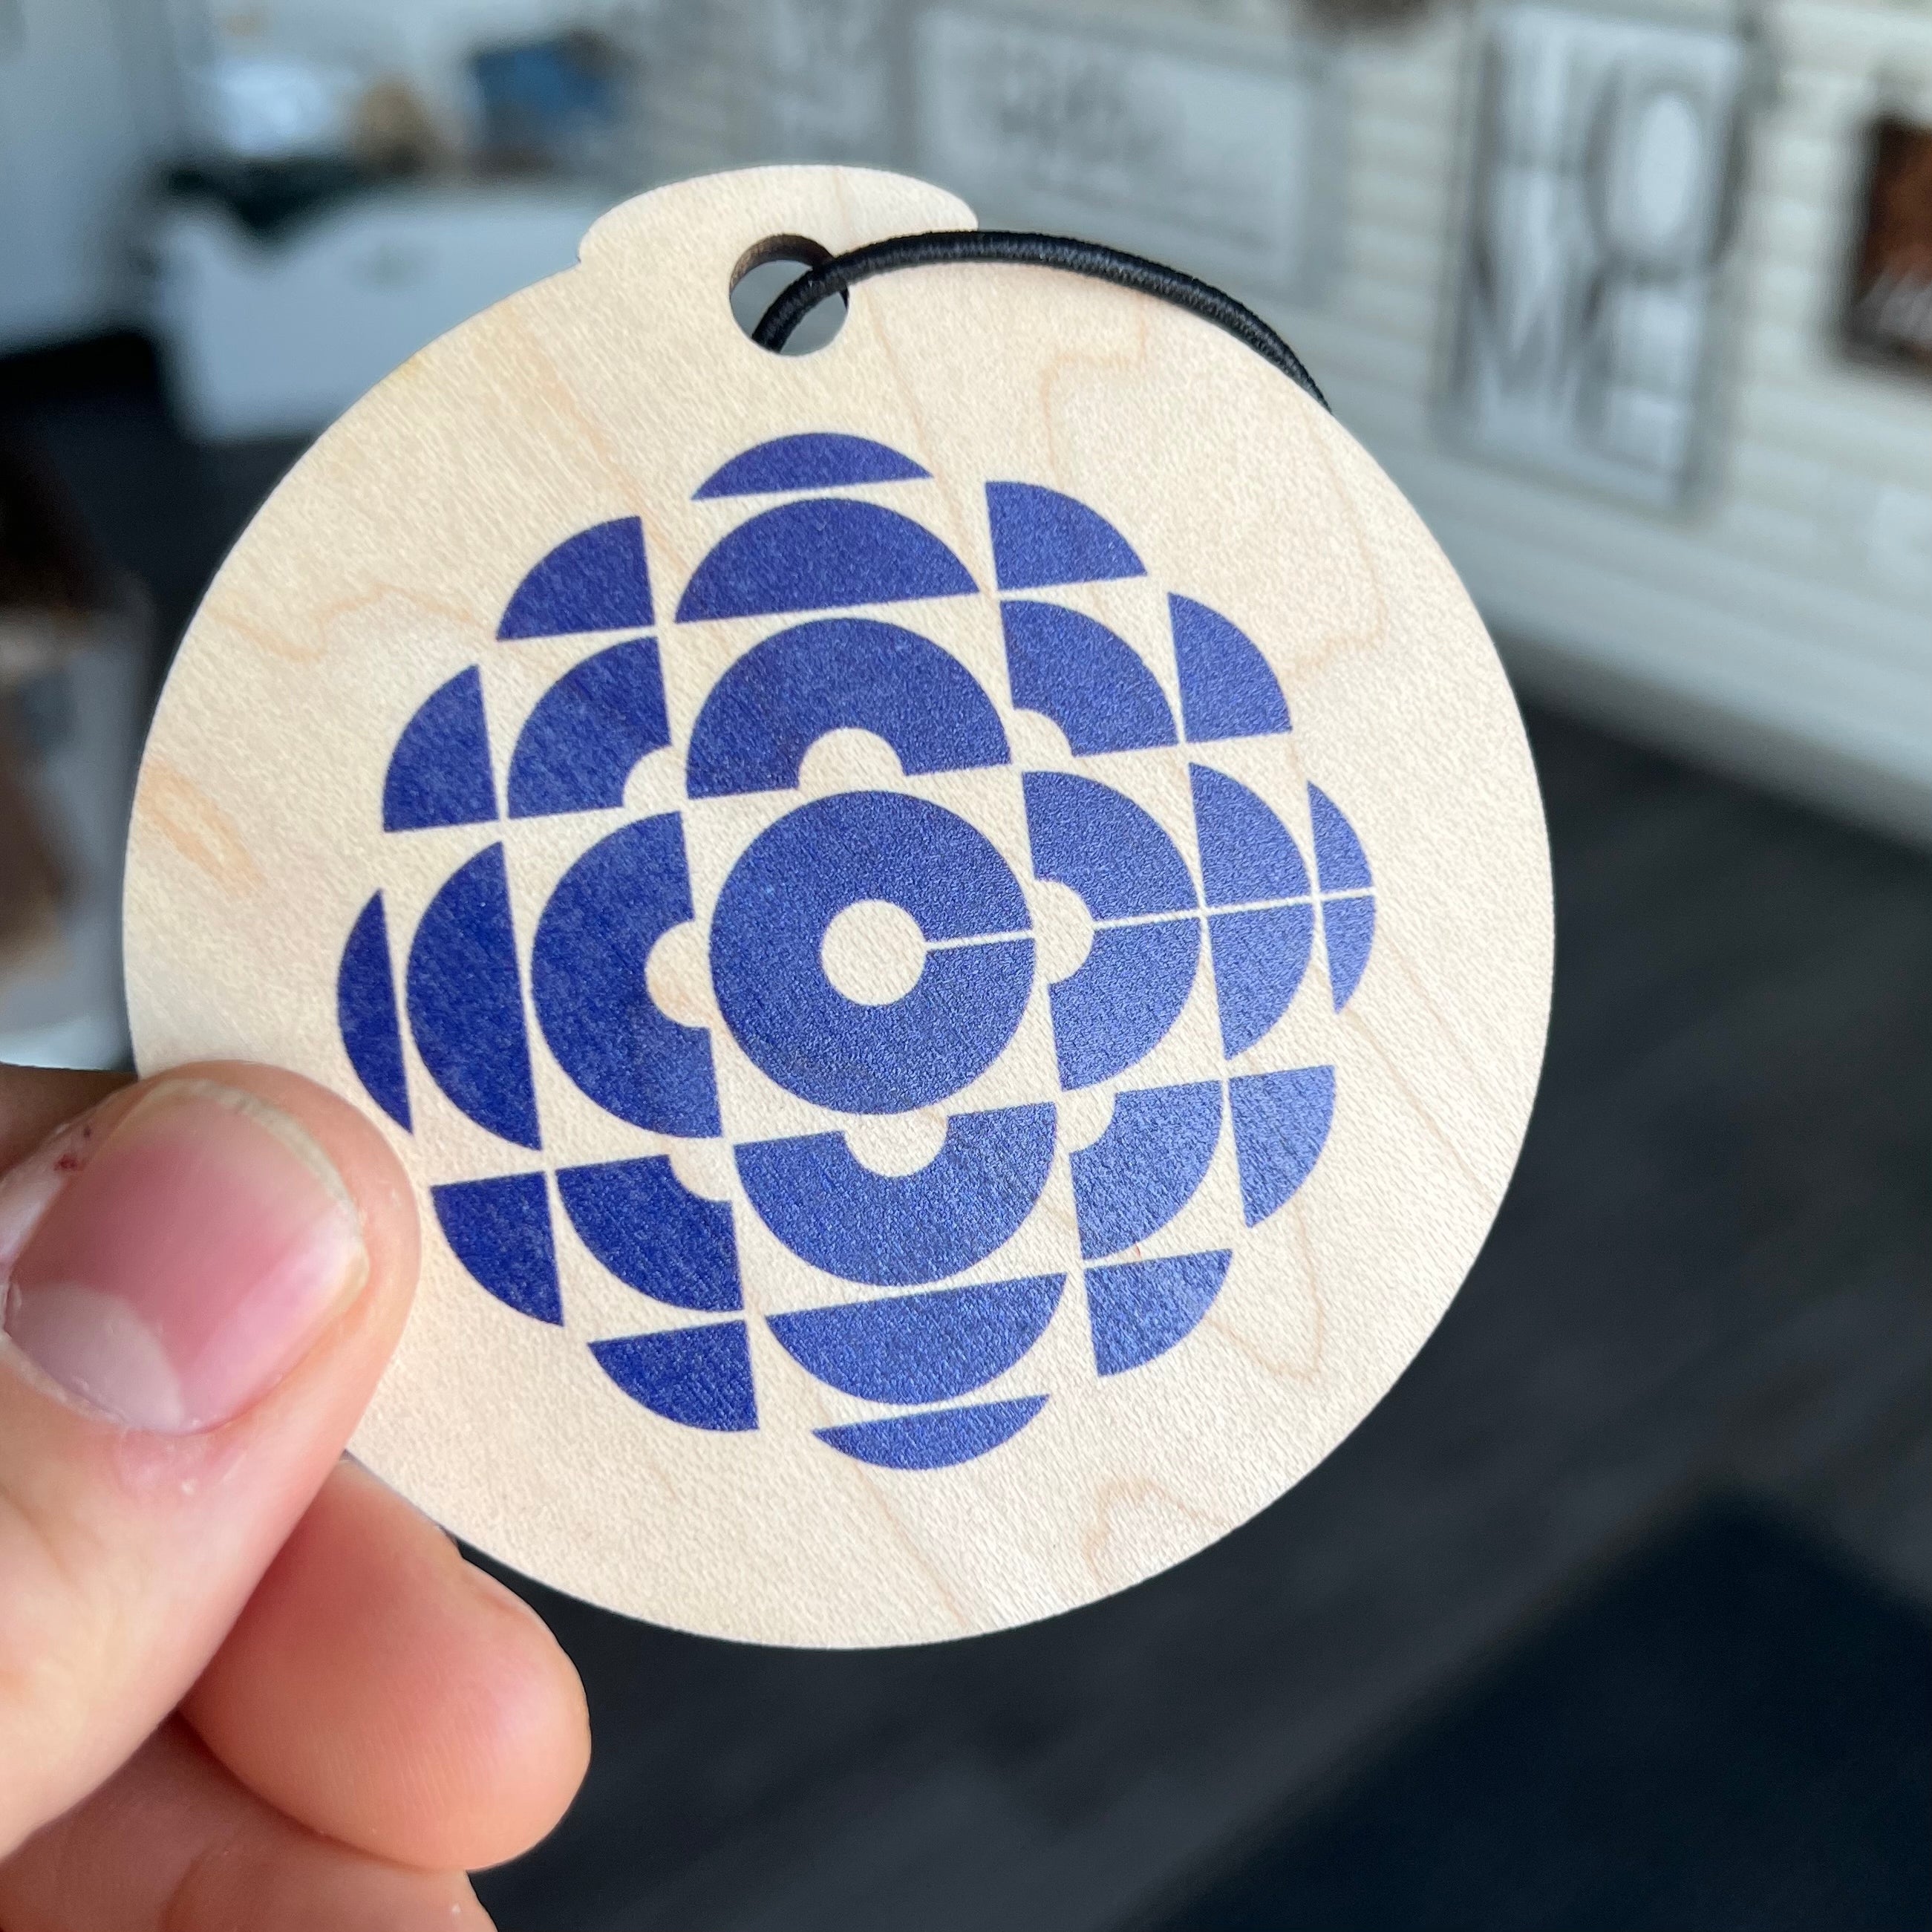 CBC Wooden Collectors Ornament / Magnet (Choose from 6 Logos!) - Sticks & Doodles